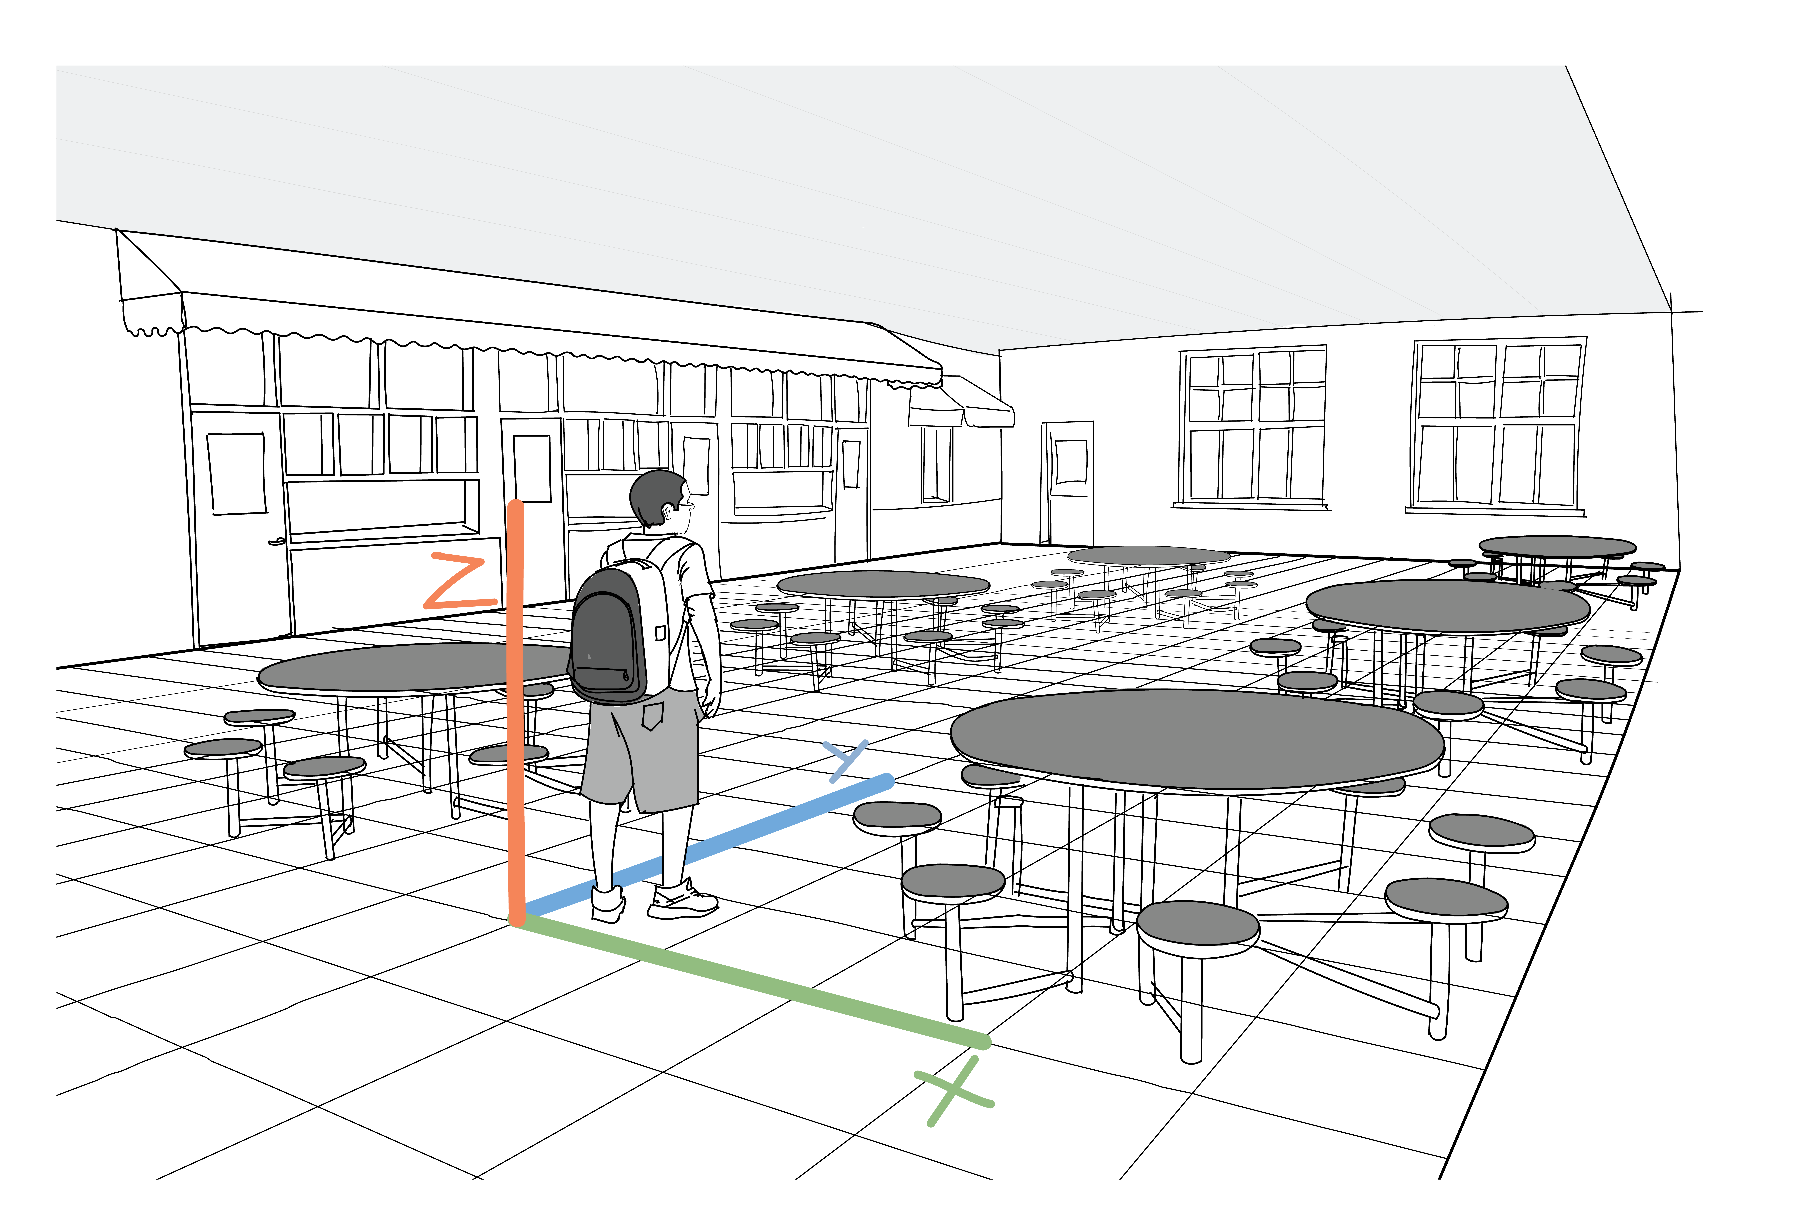 In this image you can visualize how a 3D grid can be superimposed on (or added on top of) our cafeteria floor example. See how the x direction goes to the kid’s right, y is to their front, and z is straight up from the floor. image credit Mariya Krastanova